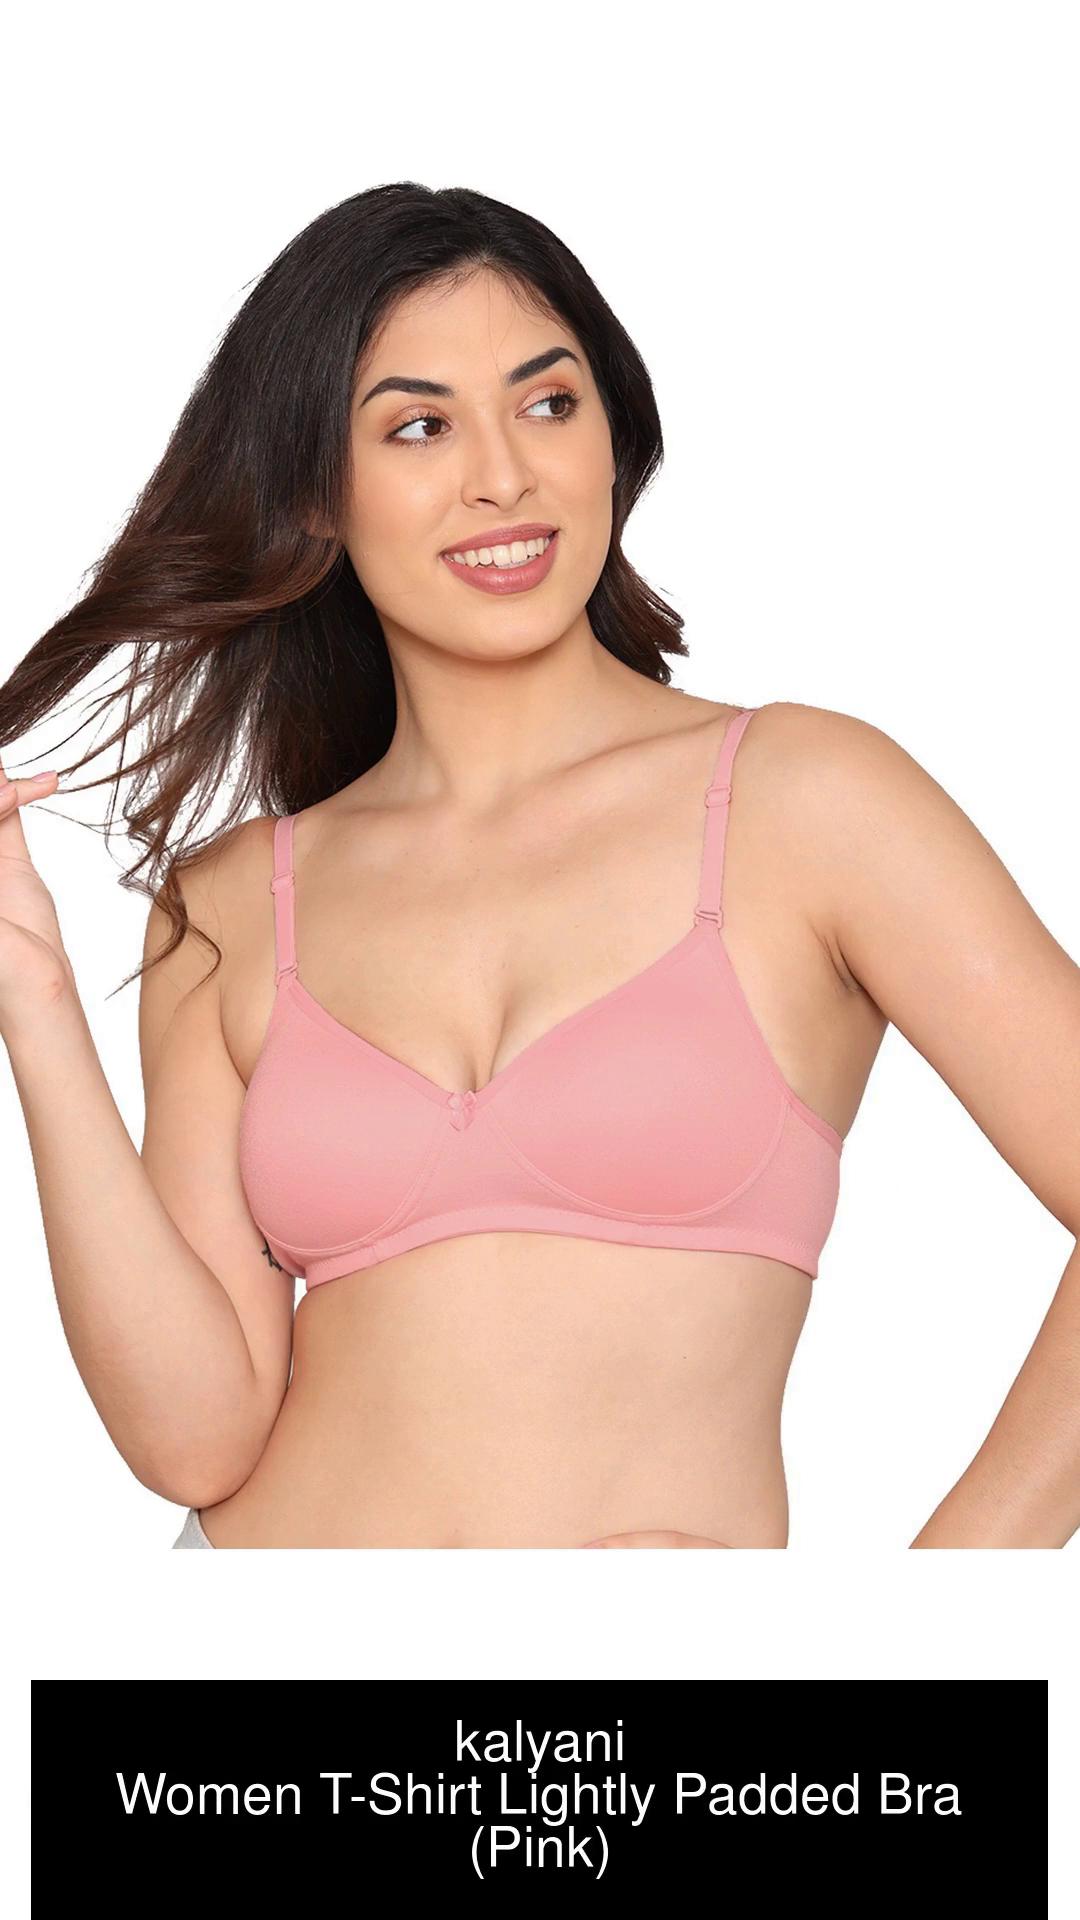 kalyani Padded Non-Wired T-shirt Bra 5018 Women T-Shirt Lightly Padded Bra  - Buy kalyani Padded Non-Wired T-shirt Bra 5018 Women T-Shirt Lightly  Padded Bra Online at Best Prices in India